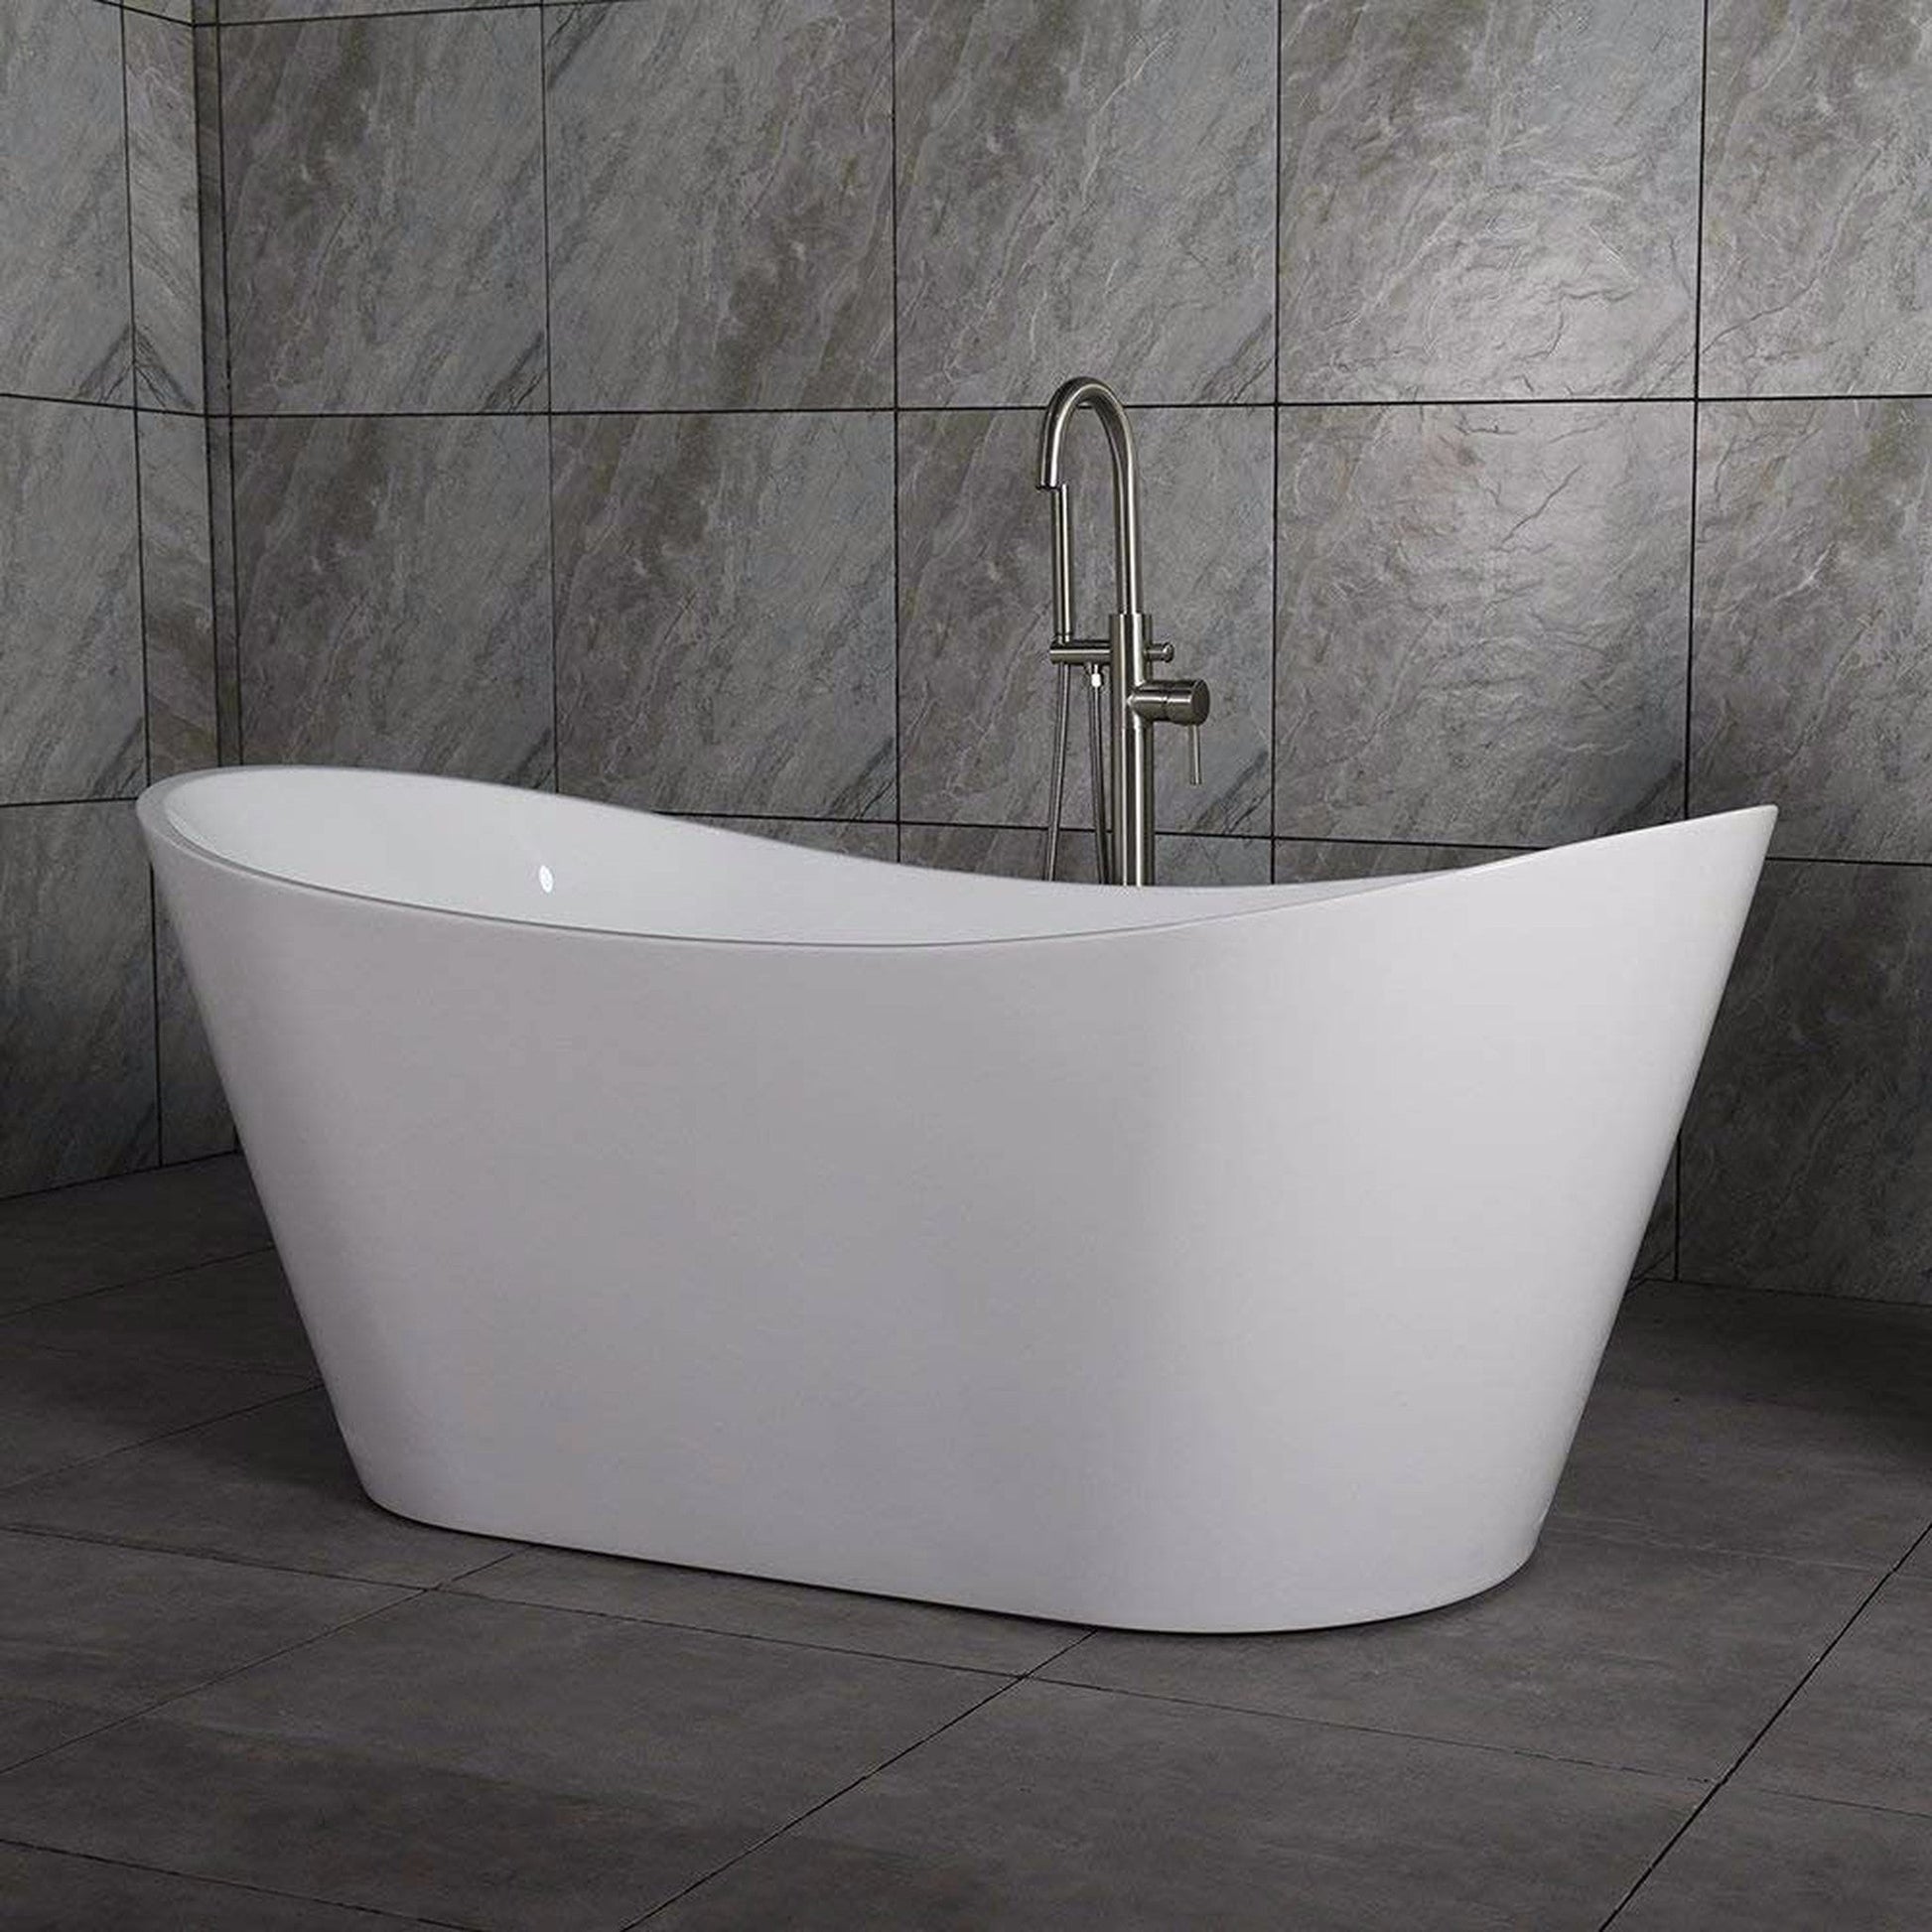 WoodBridge B0010 67" White Acrylic Freestanding Contemporary Soaking Bathtub With Brushed Nickel Drain, Overflow, F0001BNVT Tub Filler and Caddy Tray